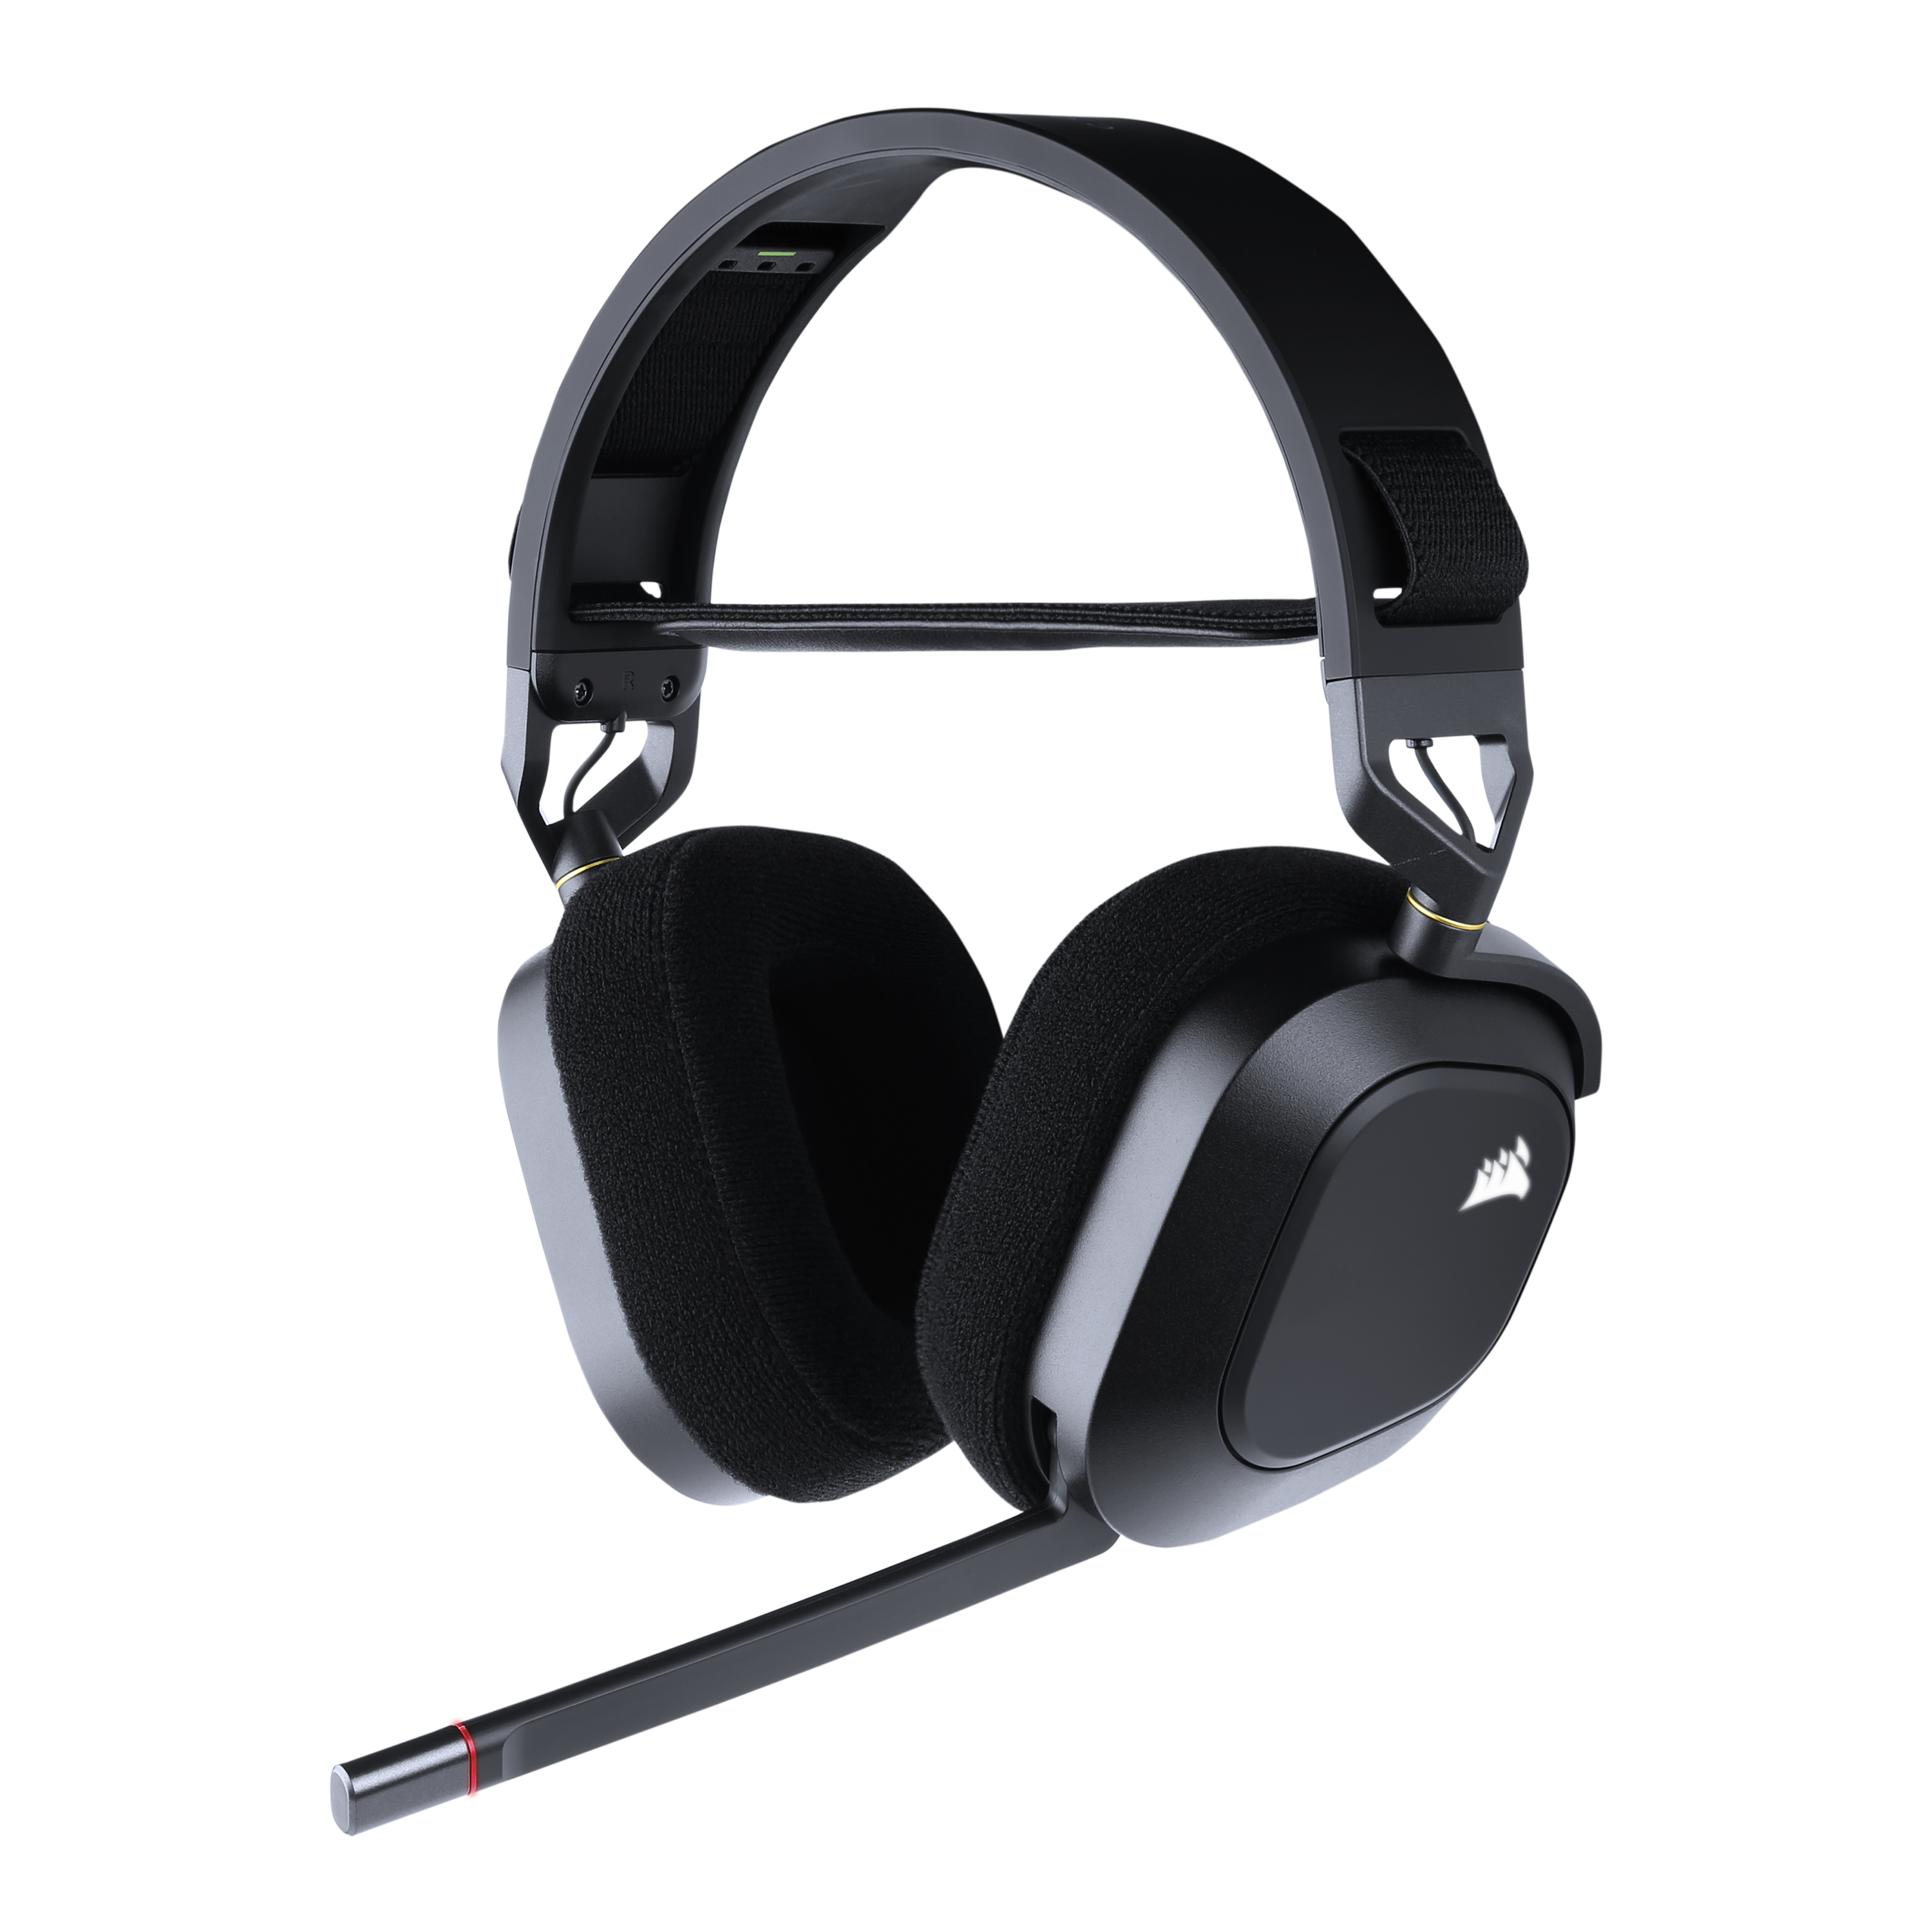 CORSAIR HS80 RGB WIRELESS Multiplatform Gaming Headset - Dolby Atmos -  Lightweight Comfort Design - Broadcast Quality Microphone - iCUE Compatible  